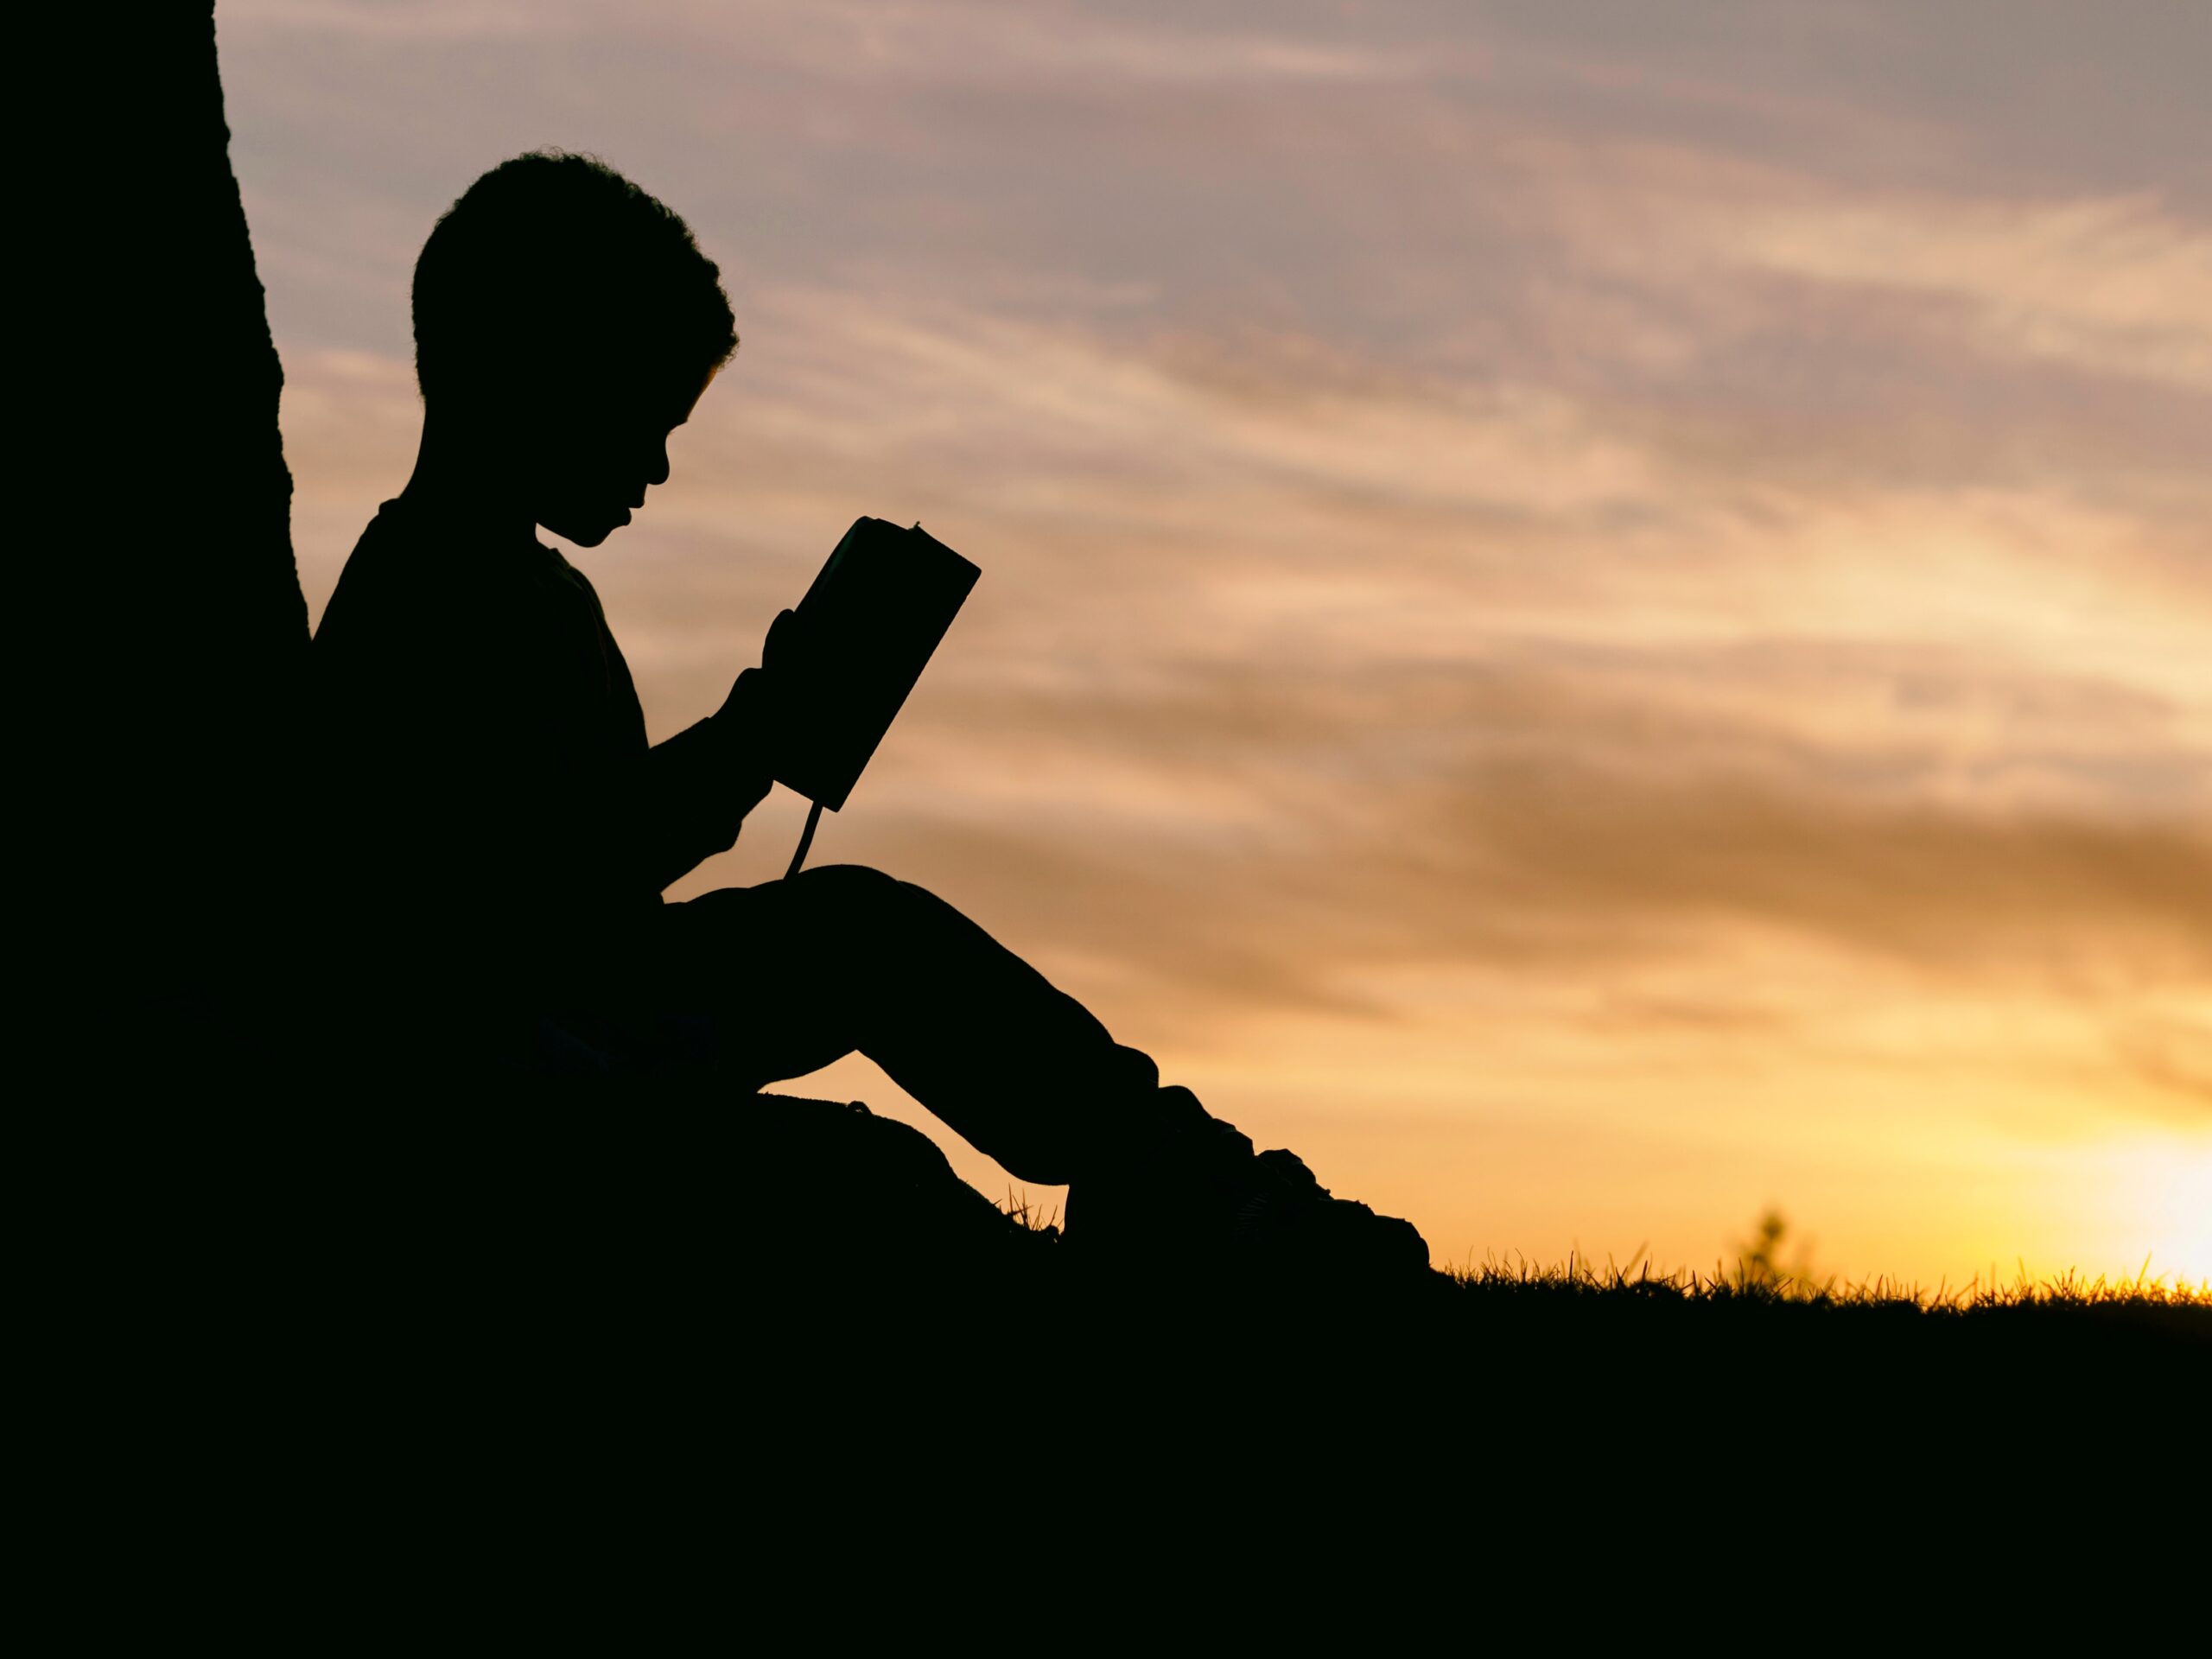 silhouette of a boy reading book in under a tree (program evaluation, impact evaluation, outcome evaluation, nonprofits, nonprofit leaders, fundraising, storytelling with data, impact stories, dataviz)